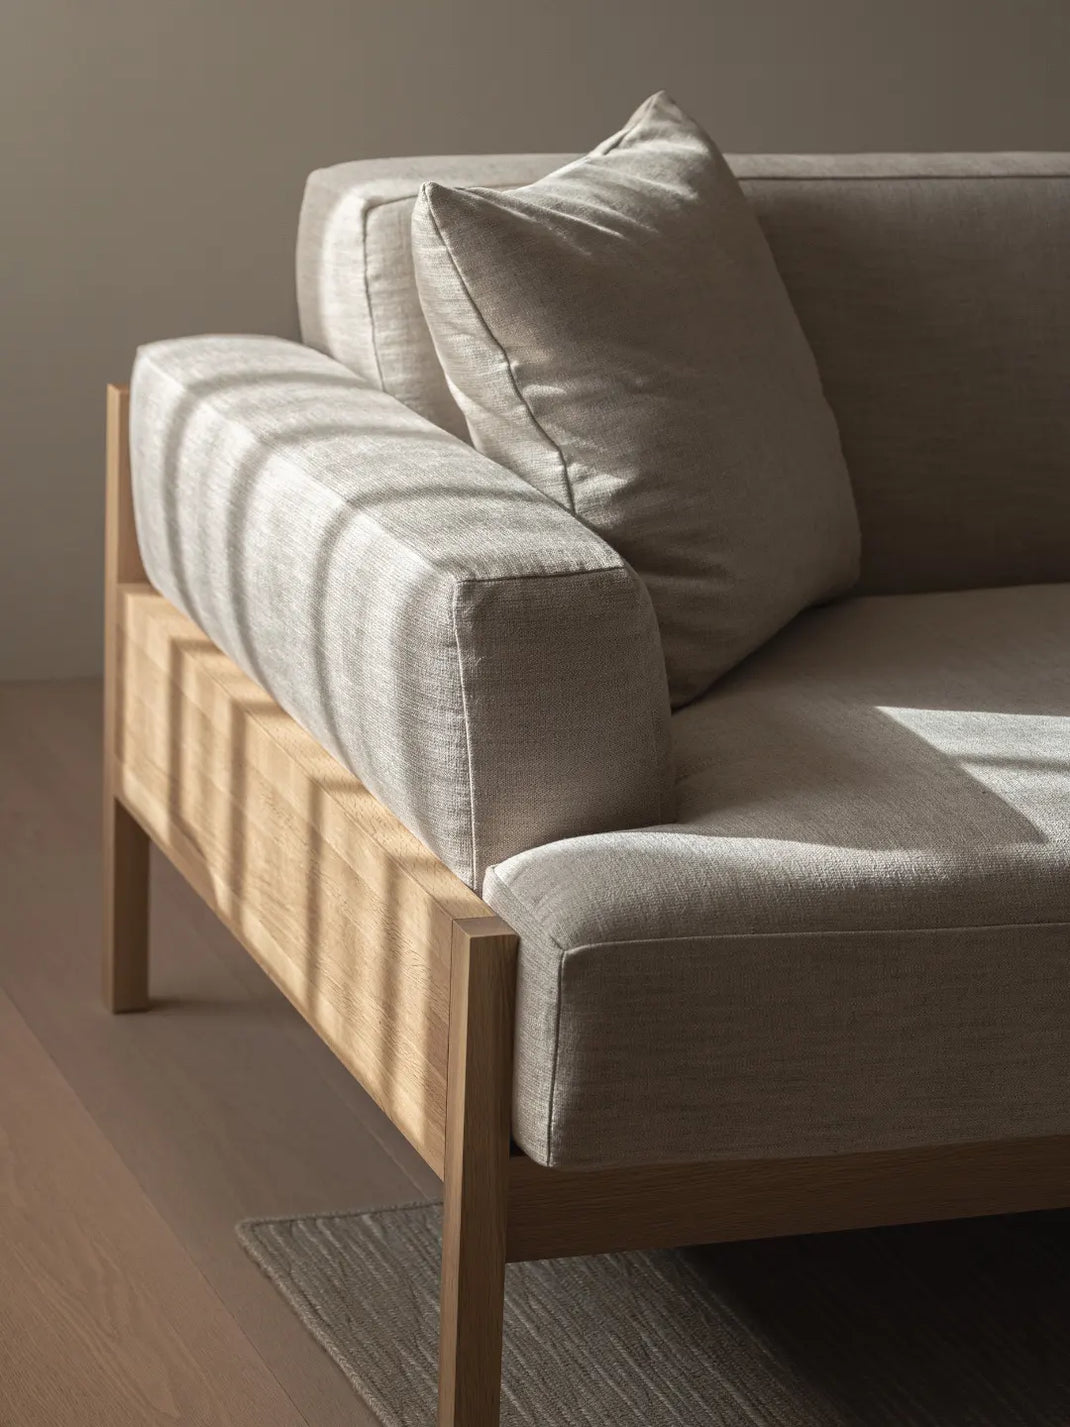 A-S01 Sofa 1-Seater